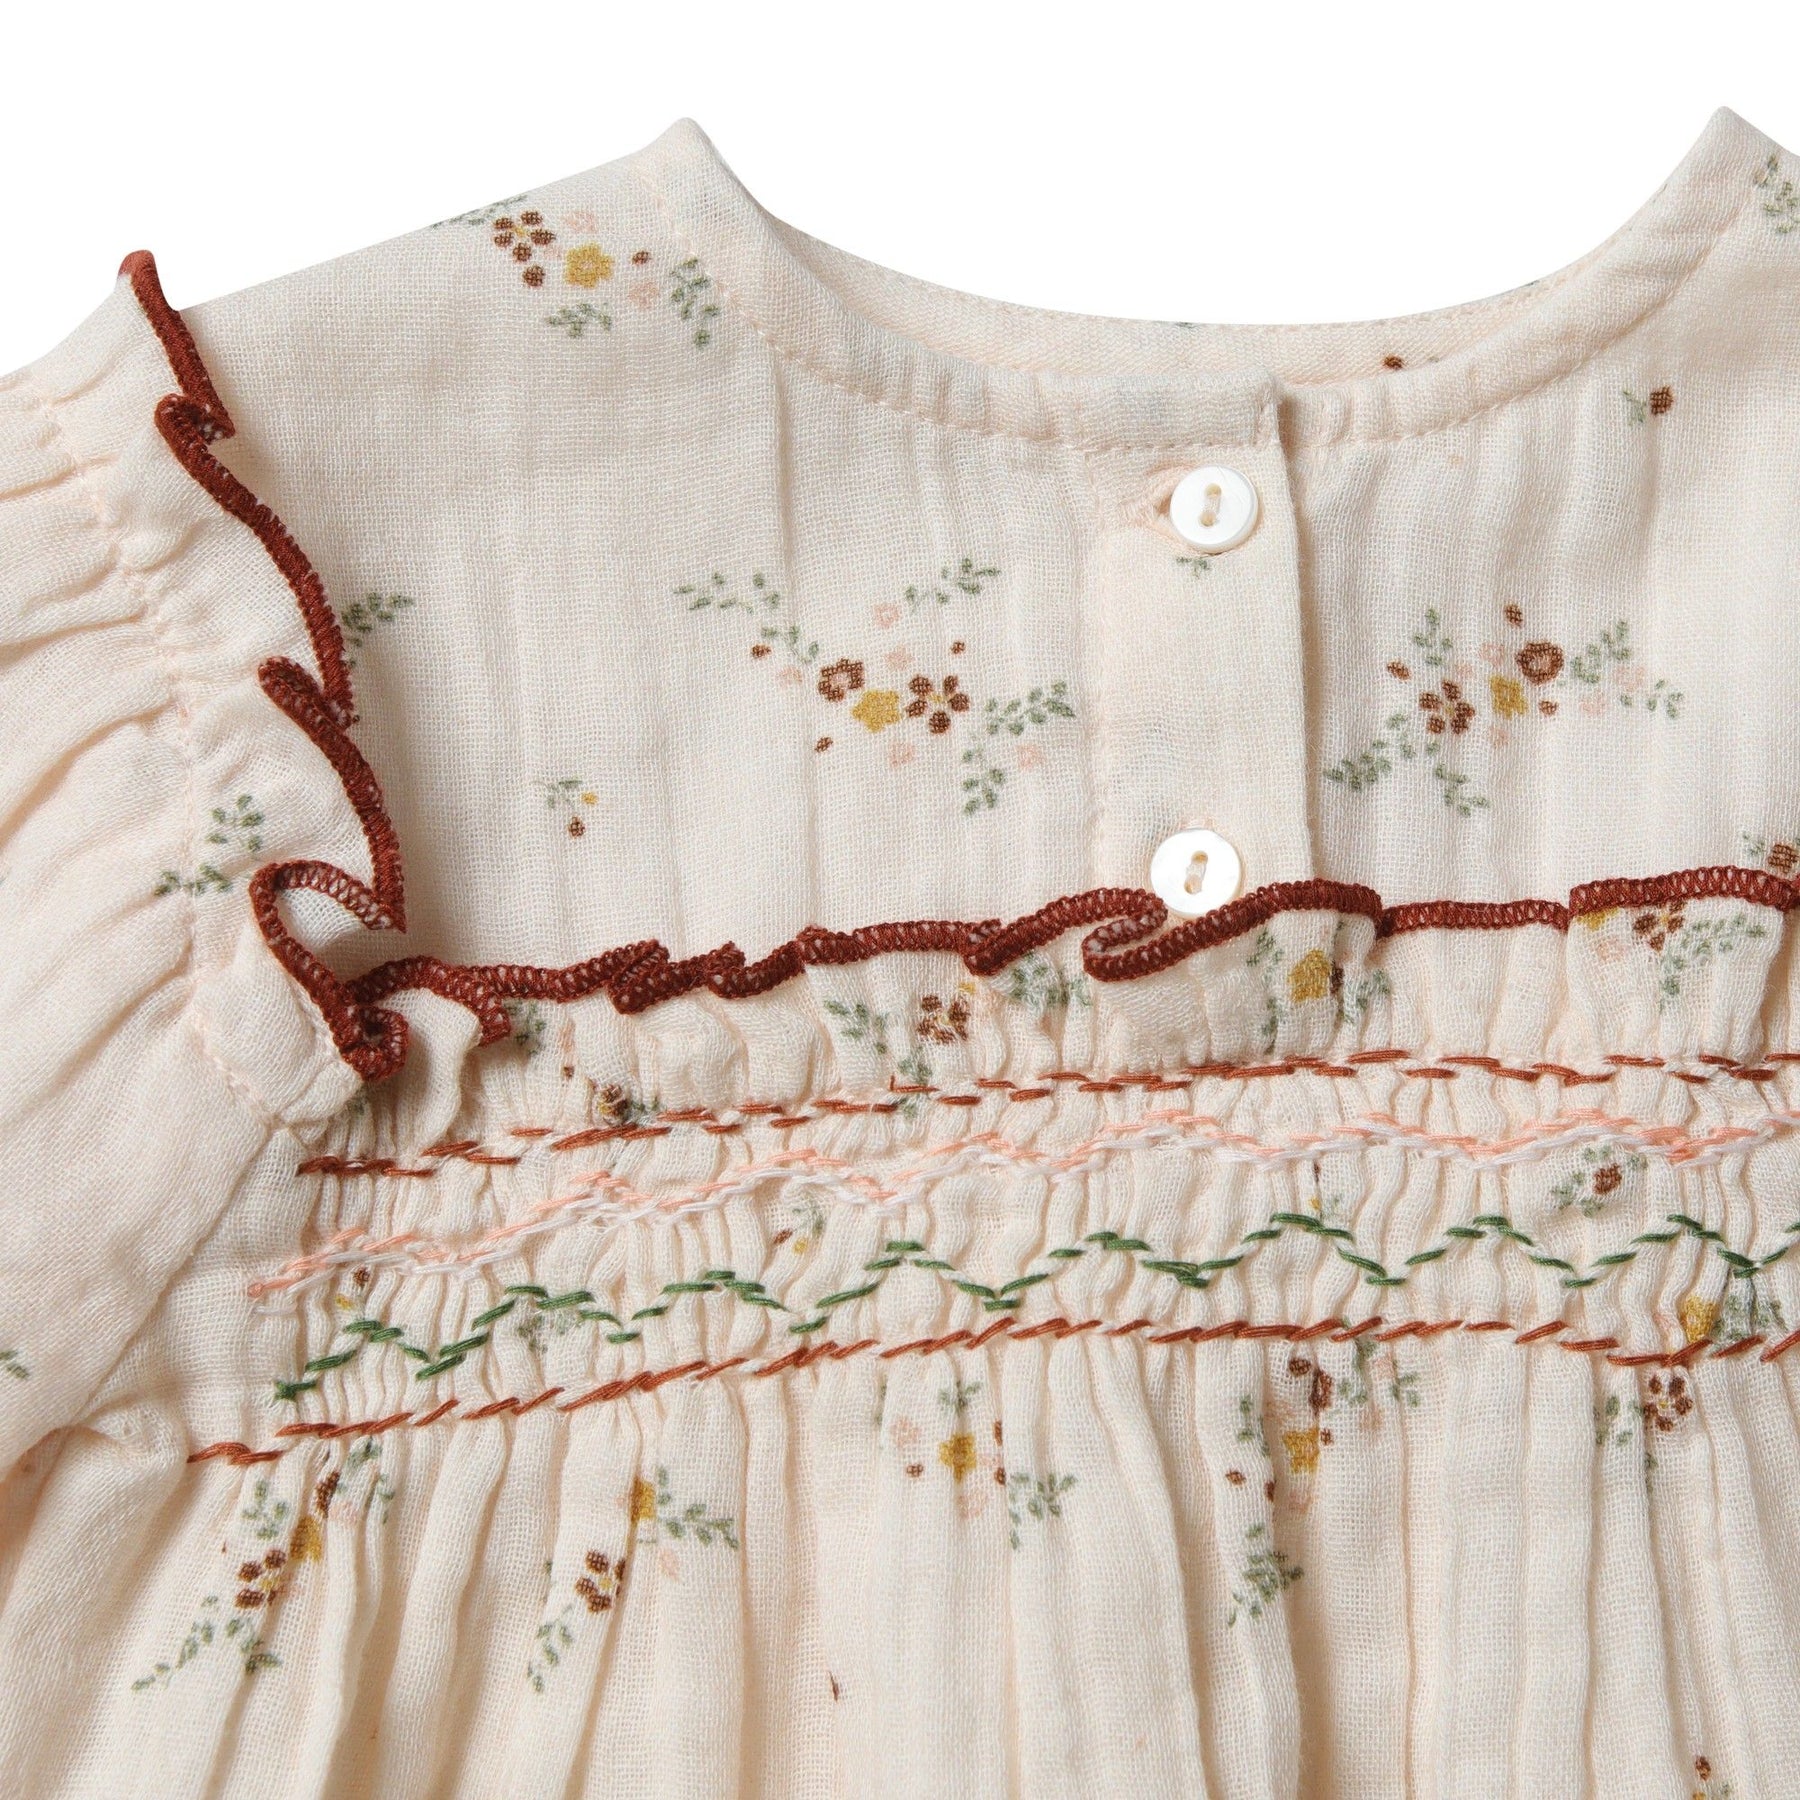 Cotton shirt with embroidered flowers